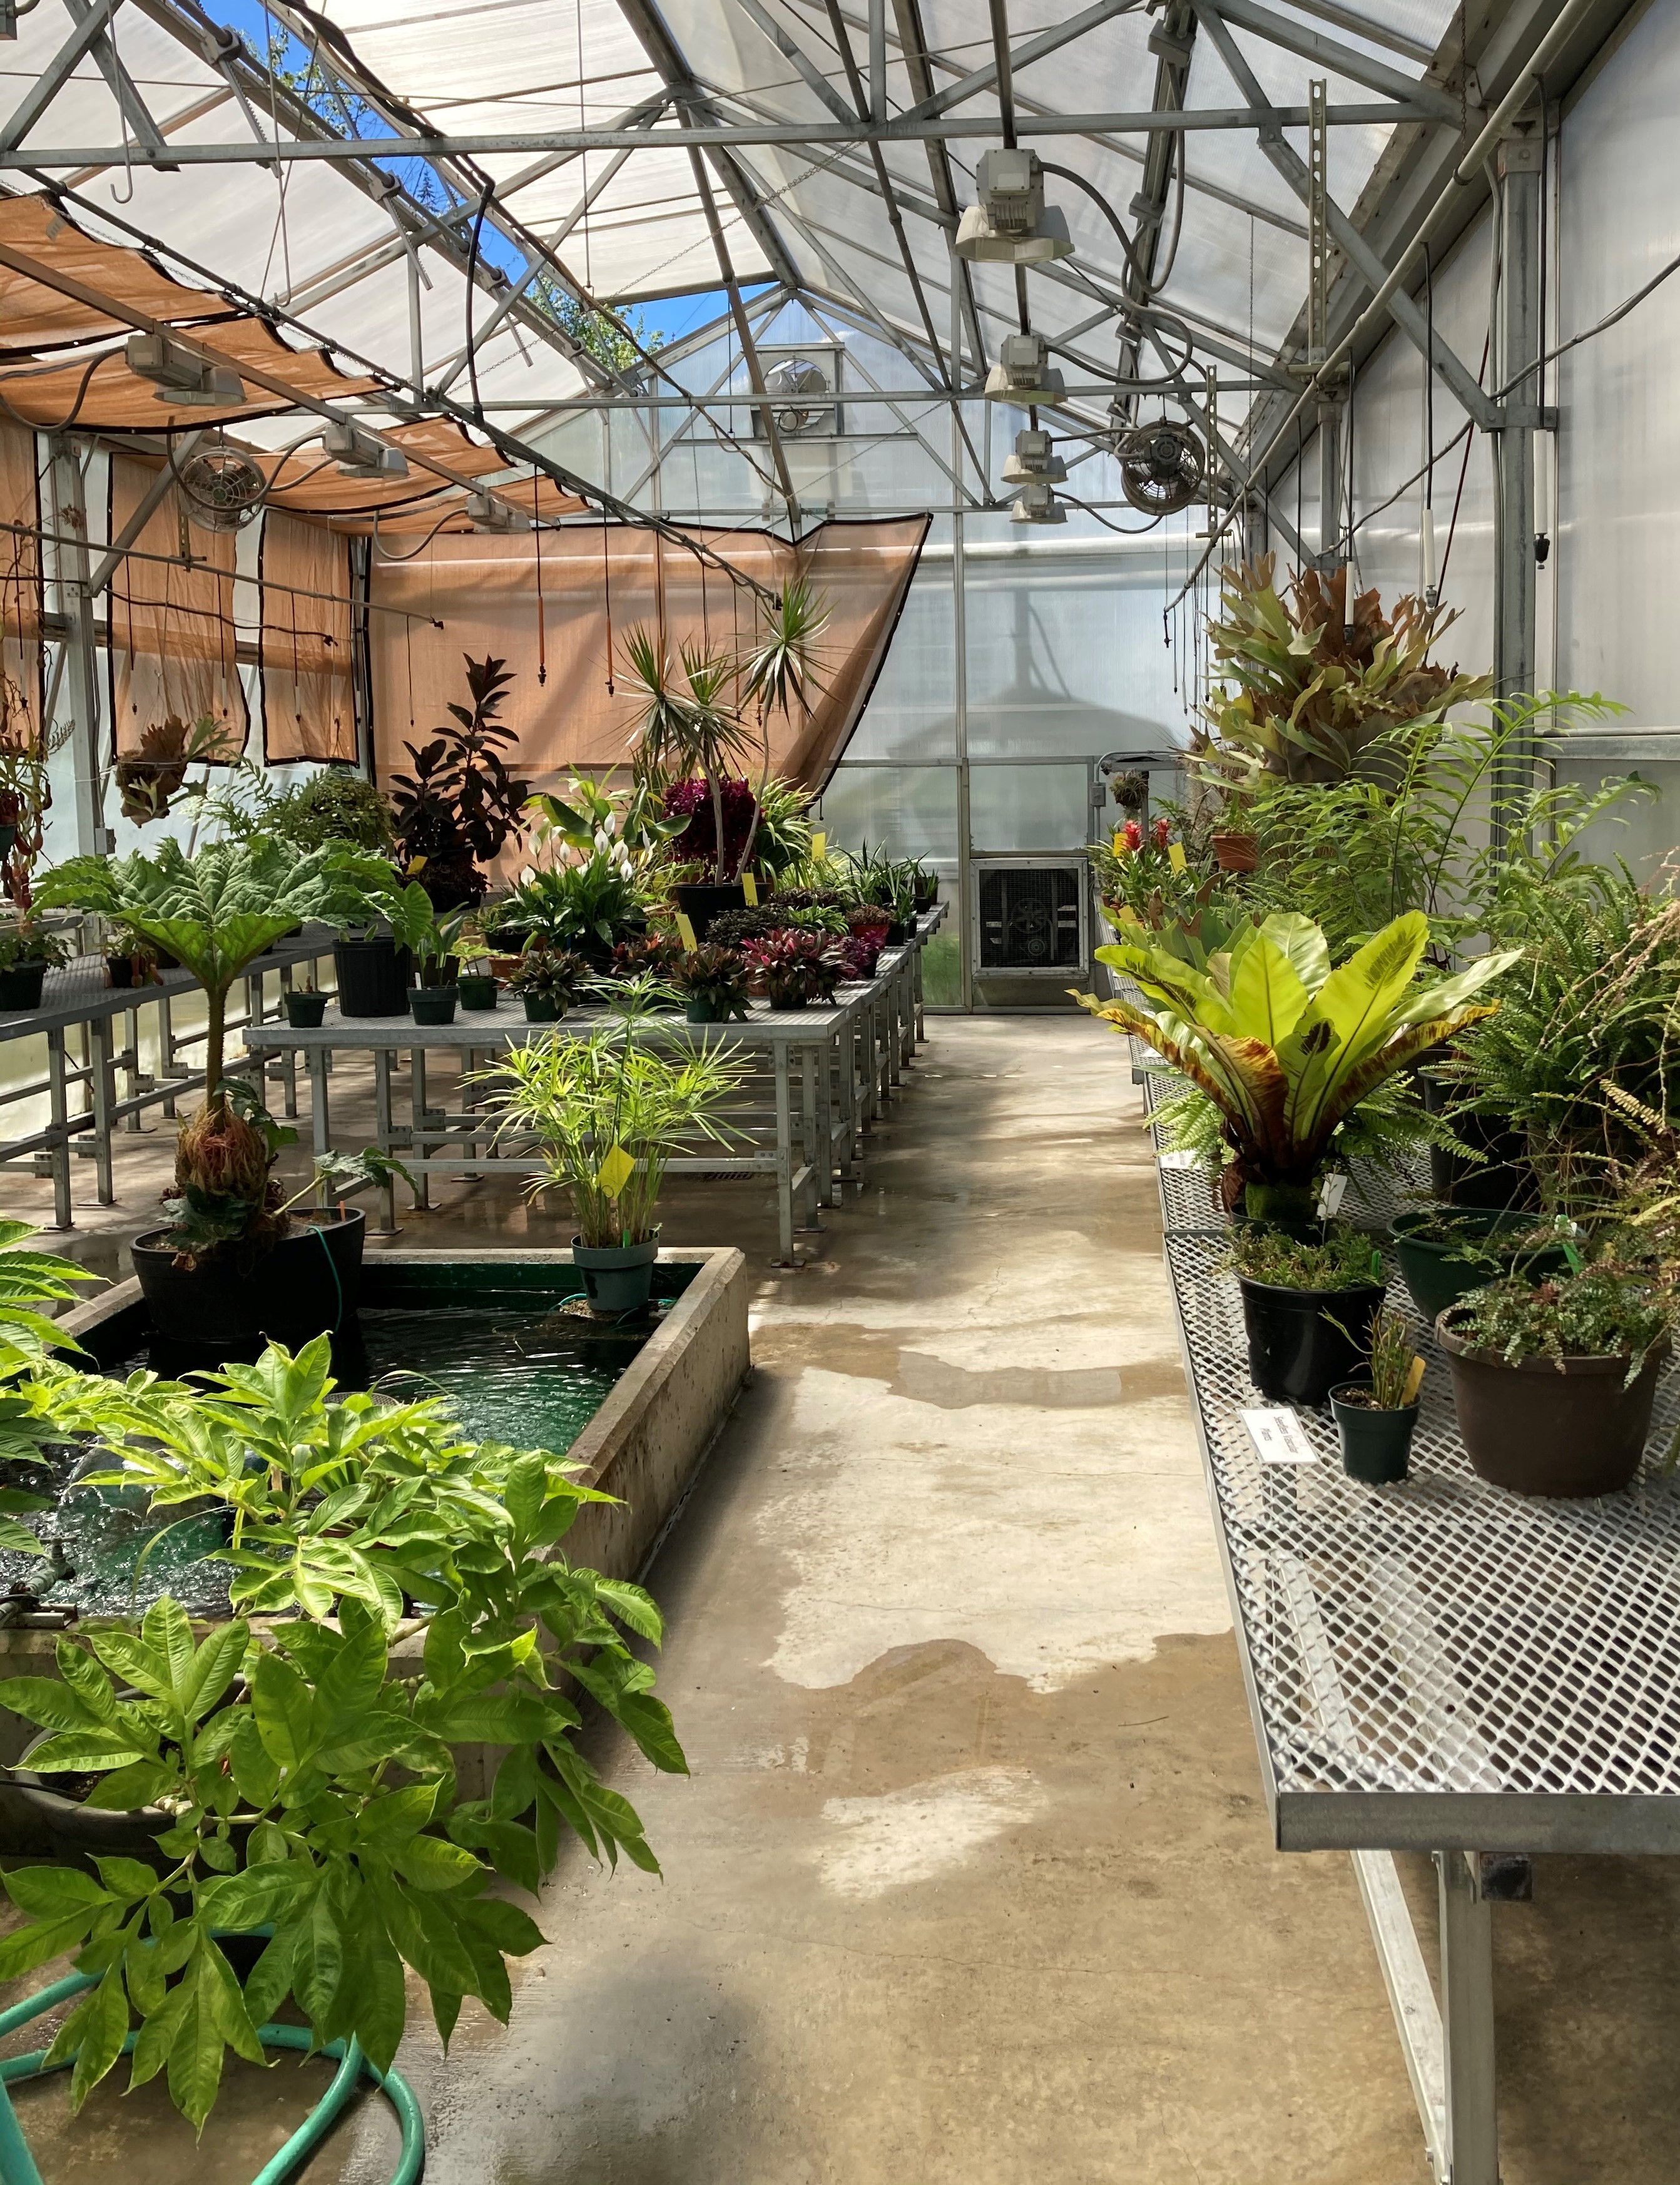 Interior of greenhouse filled with plants